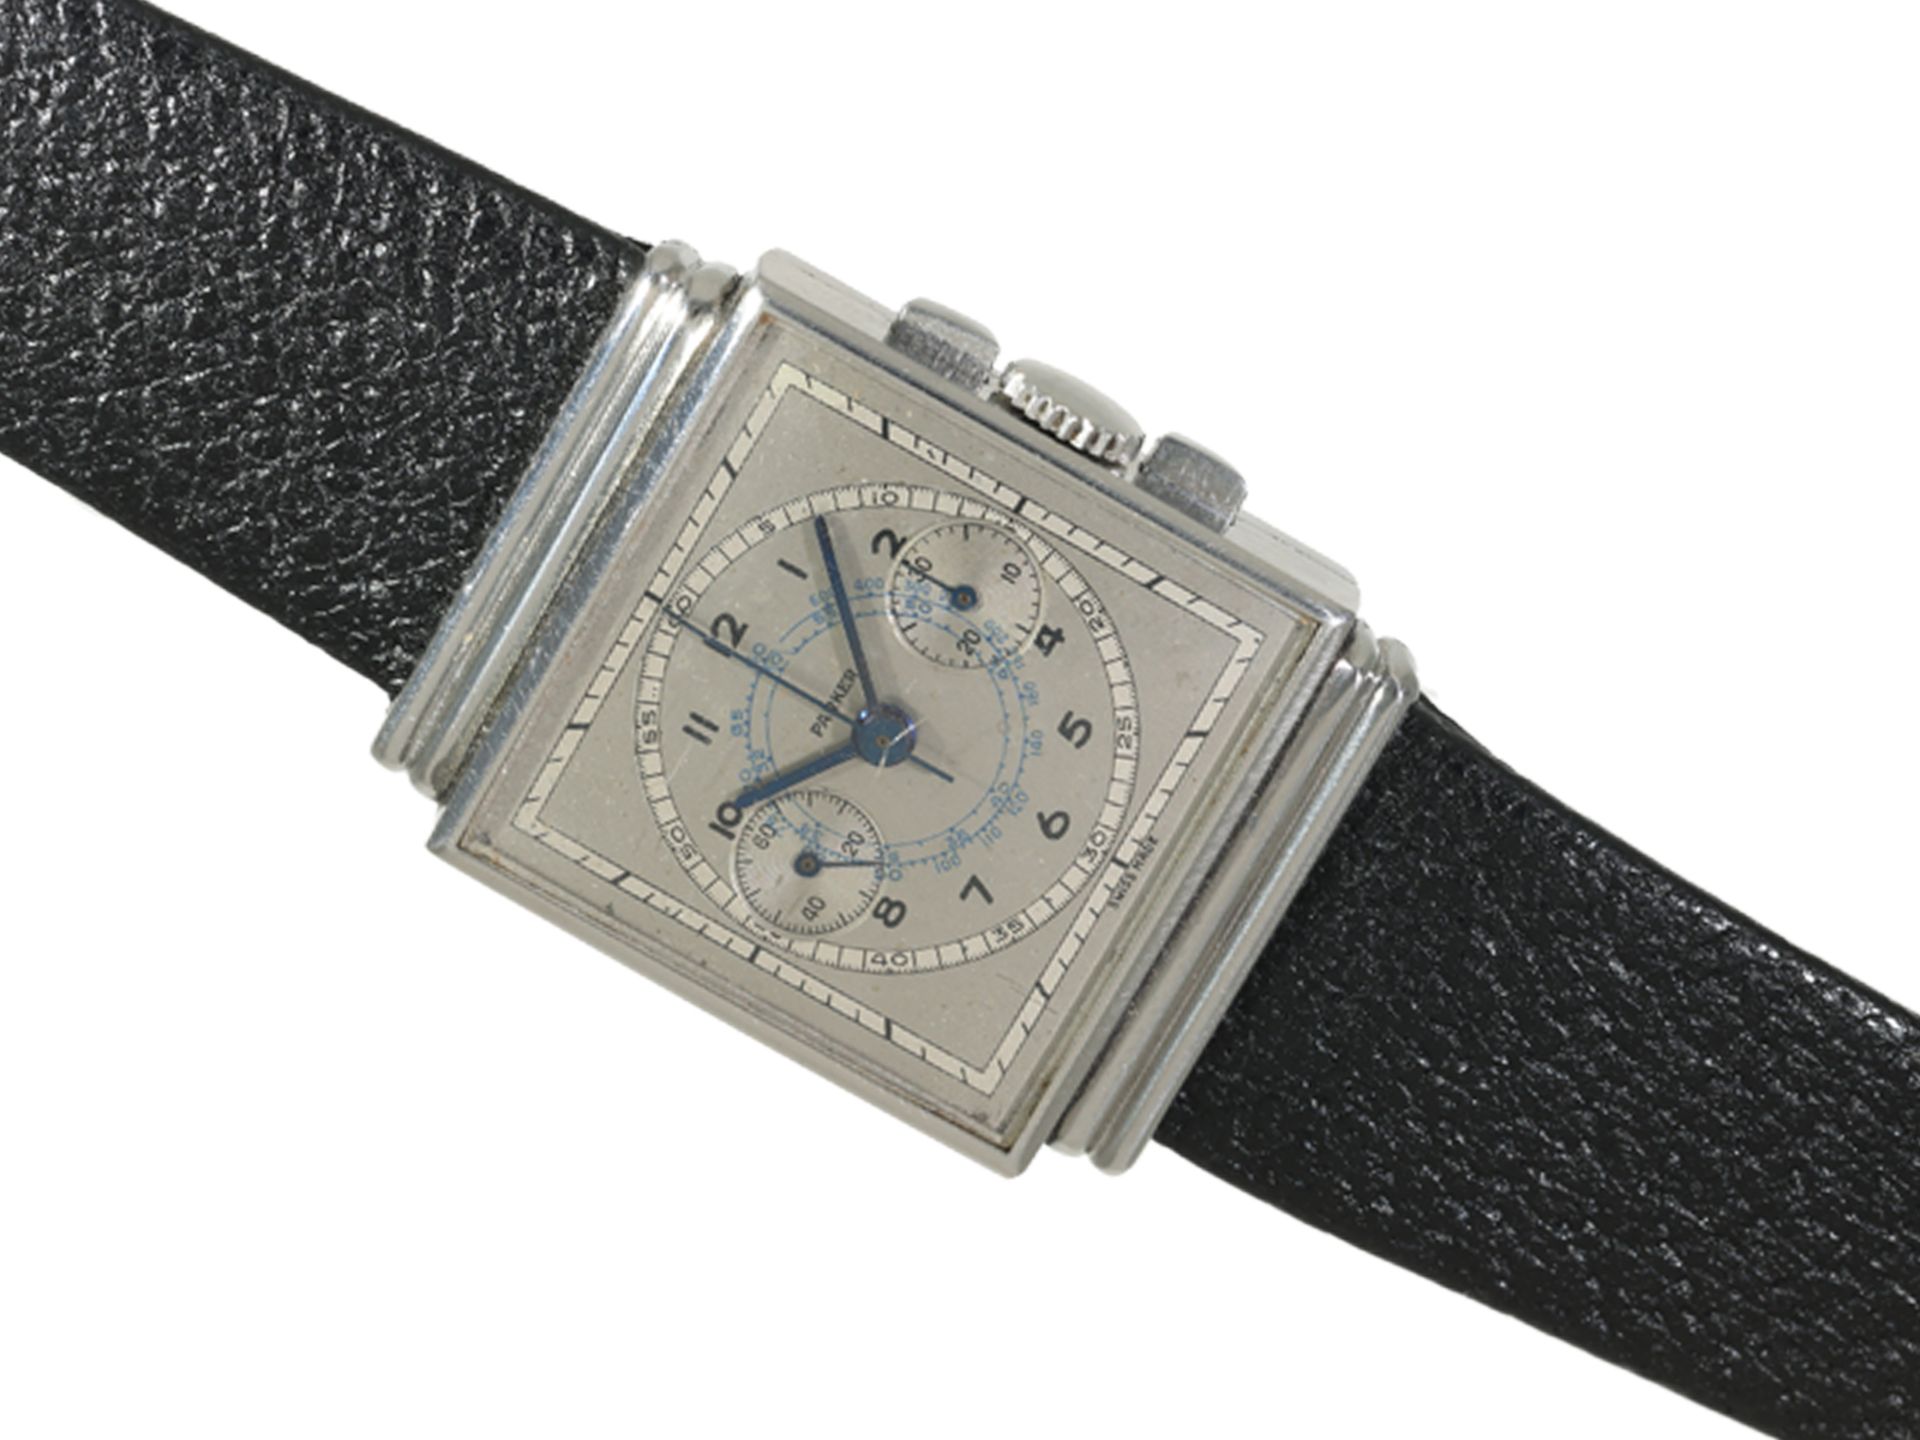 Wristwatch: very beautiful Parker Square Chronograph in steel, Val. 69, 1930s - Image 2 of 7